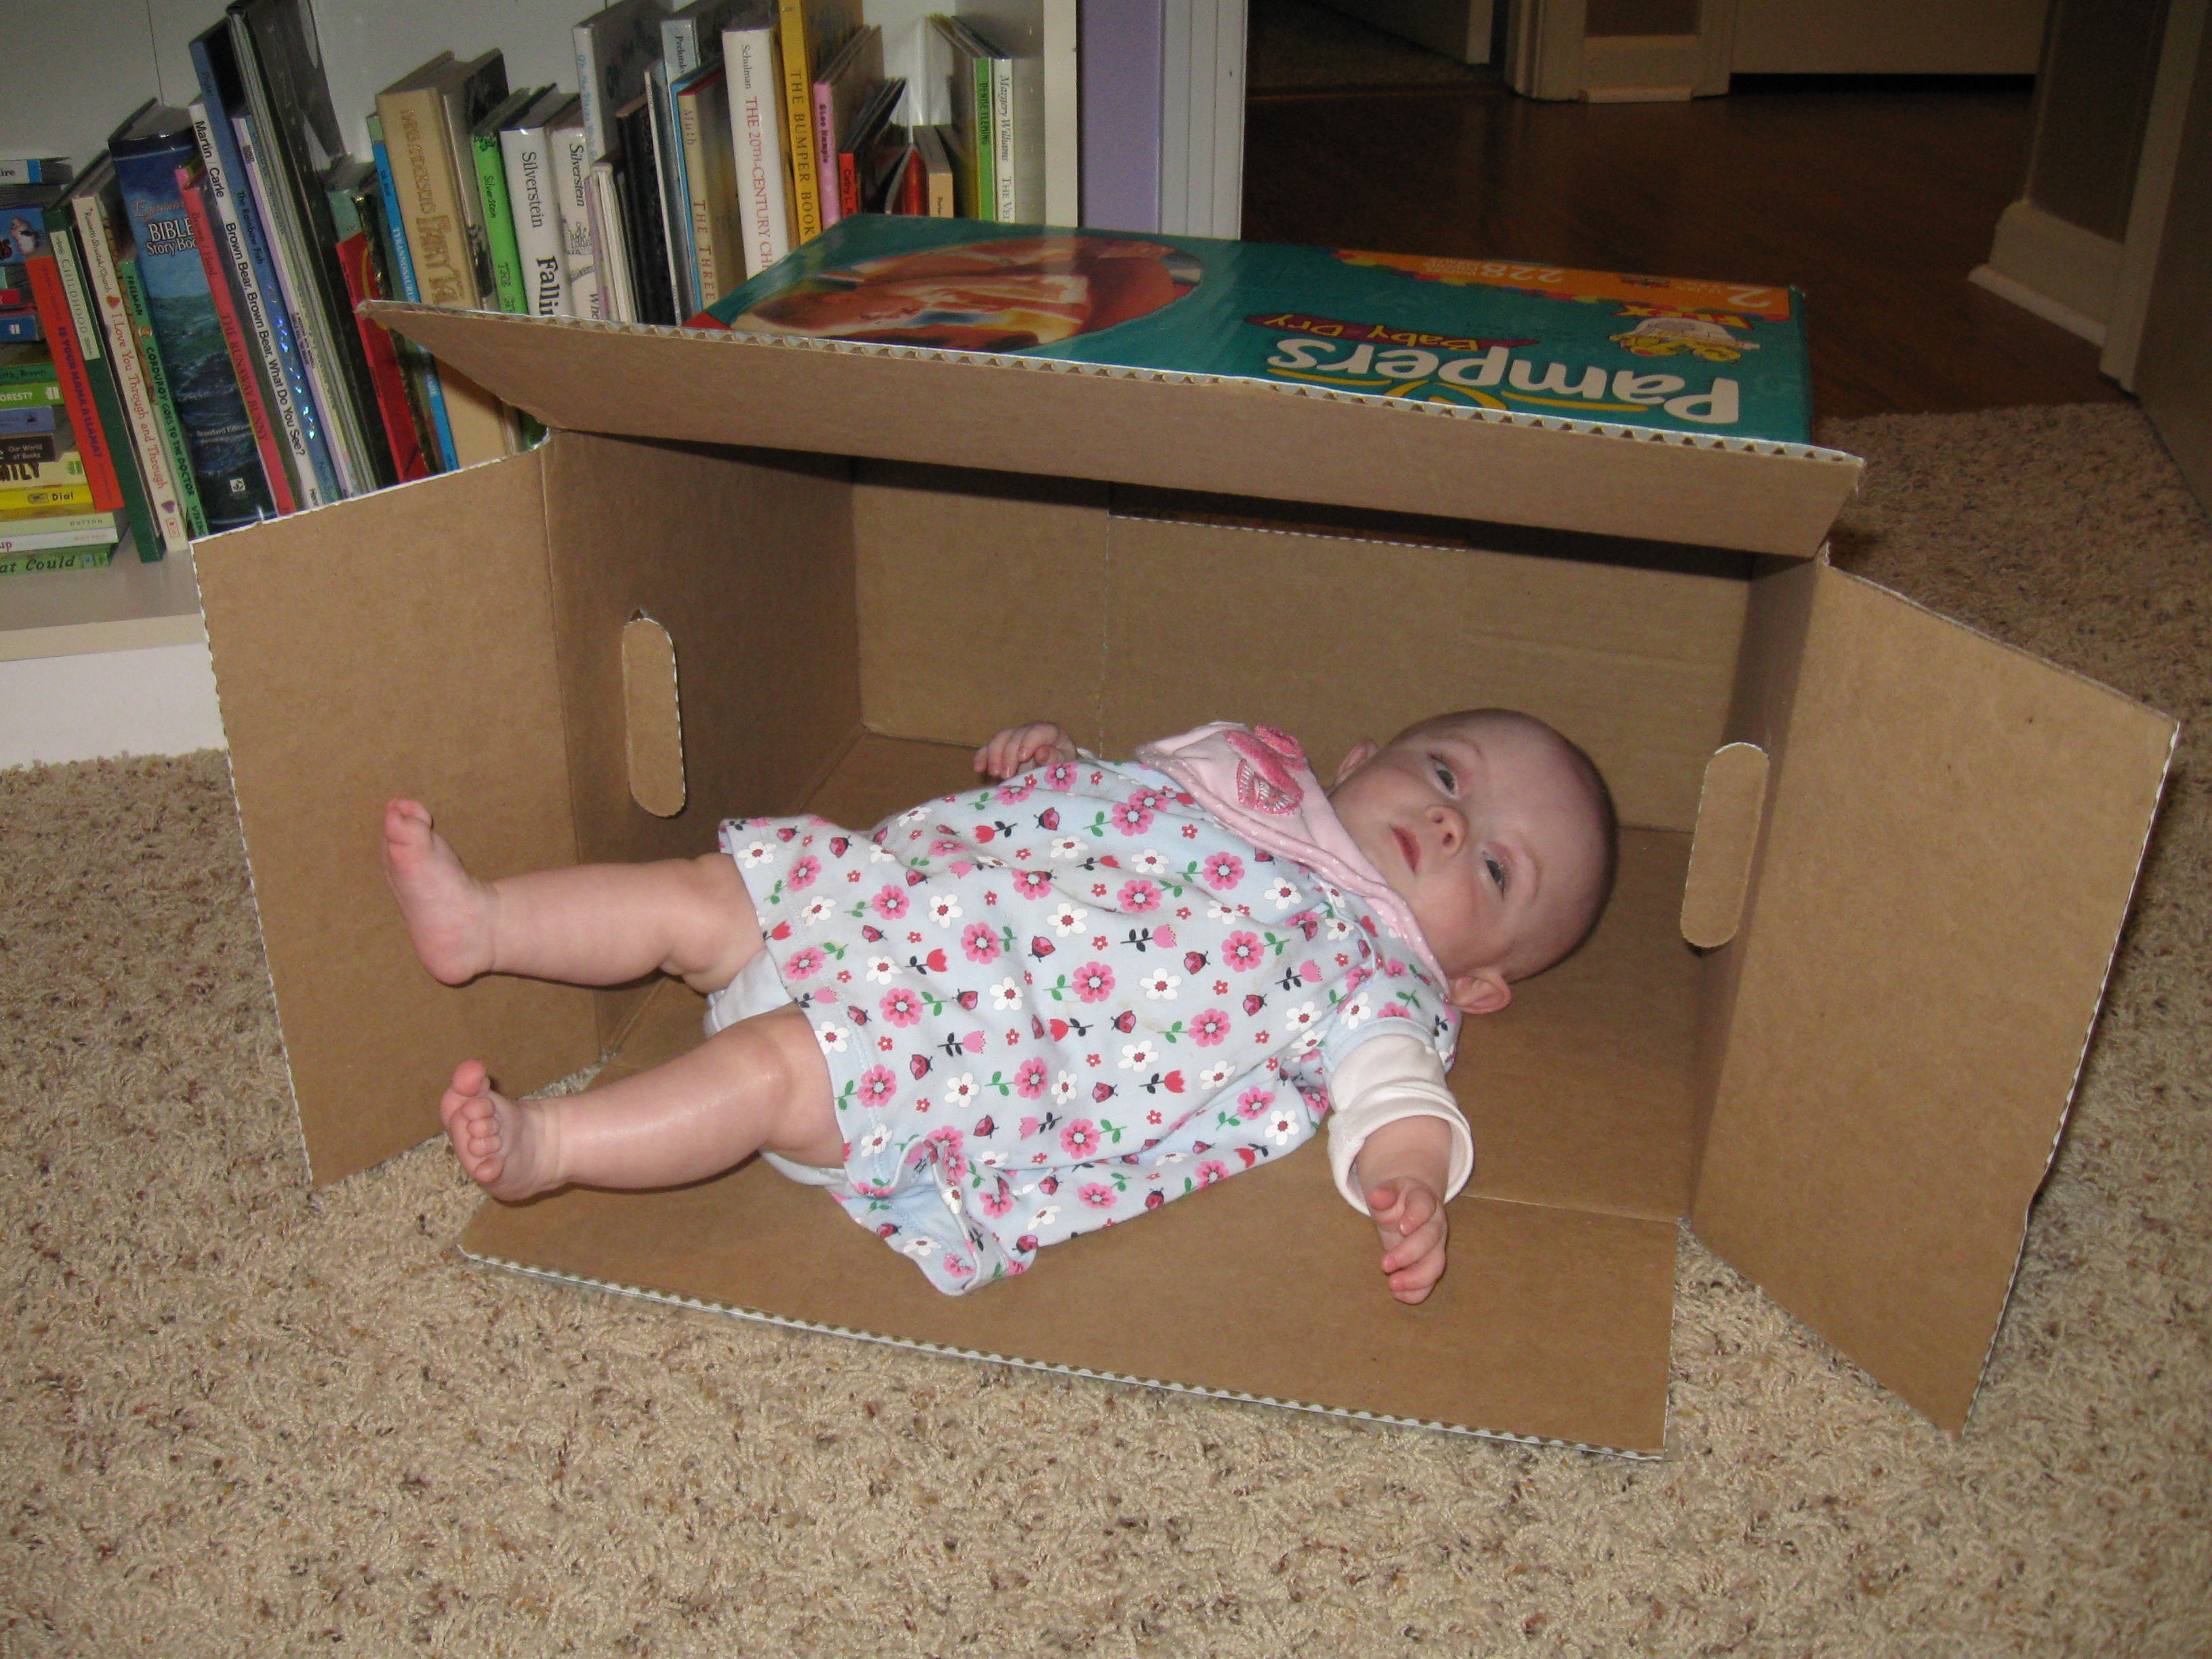 Becca in a box.  She thought it was really funny.  She definitely enjoyed it more than the dogs enjoyed their turns.